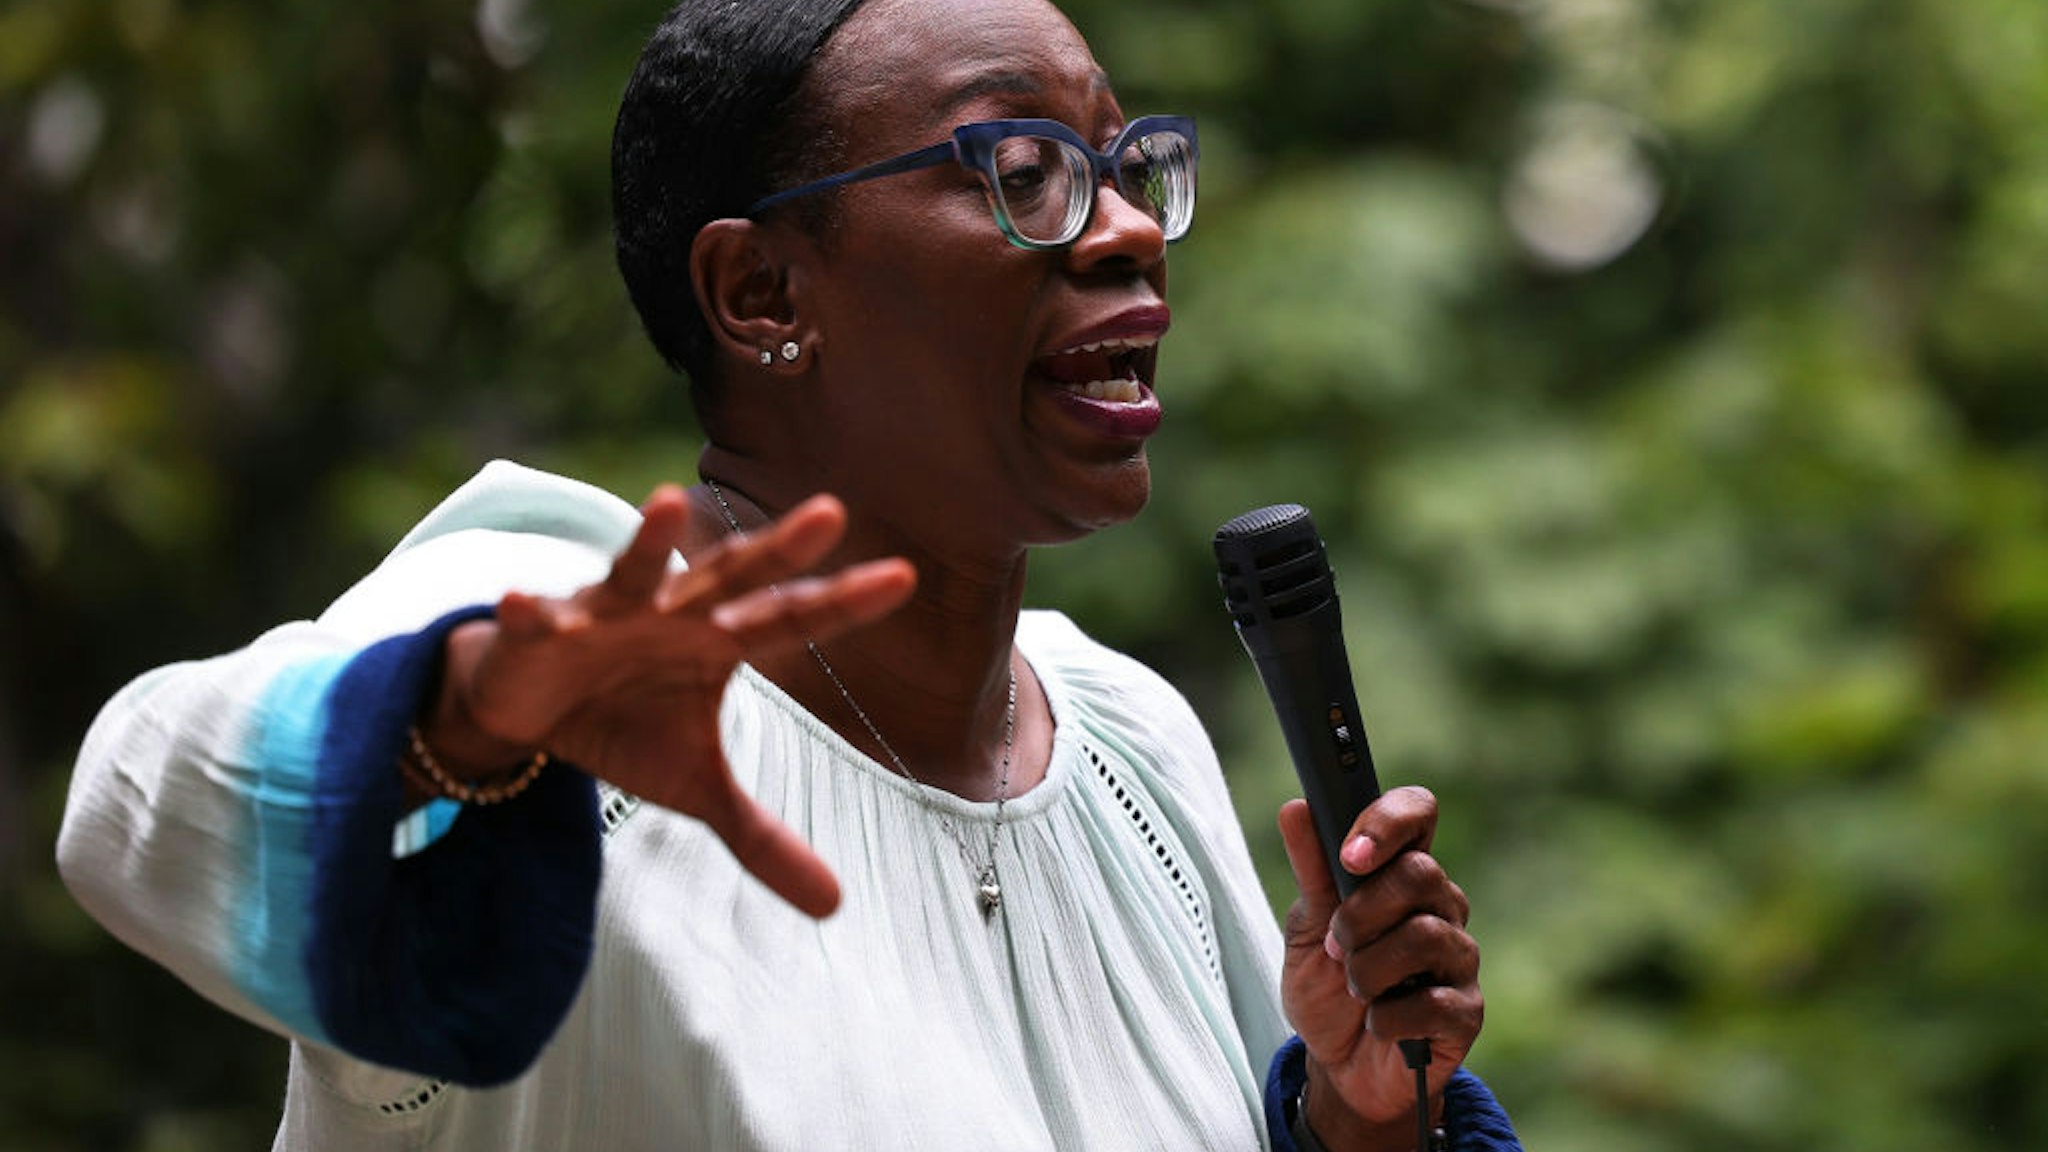 CLEVELAND, OHIO - JULY 30: U.S. Congressional candidate Nina Turner speaks to a crowd of volunteers before a Get Out the Vote canvassing event on July 30, 2021 in Cleveland Heights, Ohio. A special election is set for August 3rd for Ohio's 11th Congressional District primary with Congressional Candidate Nina Turner and Cuyahoga Councilwoman Shontel Brown being the frontrunners ahead of 11 other Democratic candidates in the race. The special election was triggered after former Rep. Marcia Fudge, joined the Biden administration to become the U.S. Secretary of Housing and Urban Development. (Photo by Michael M. Santiago/Getty Images)